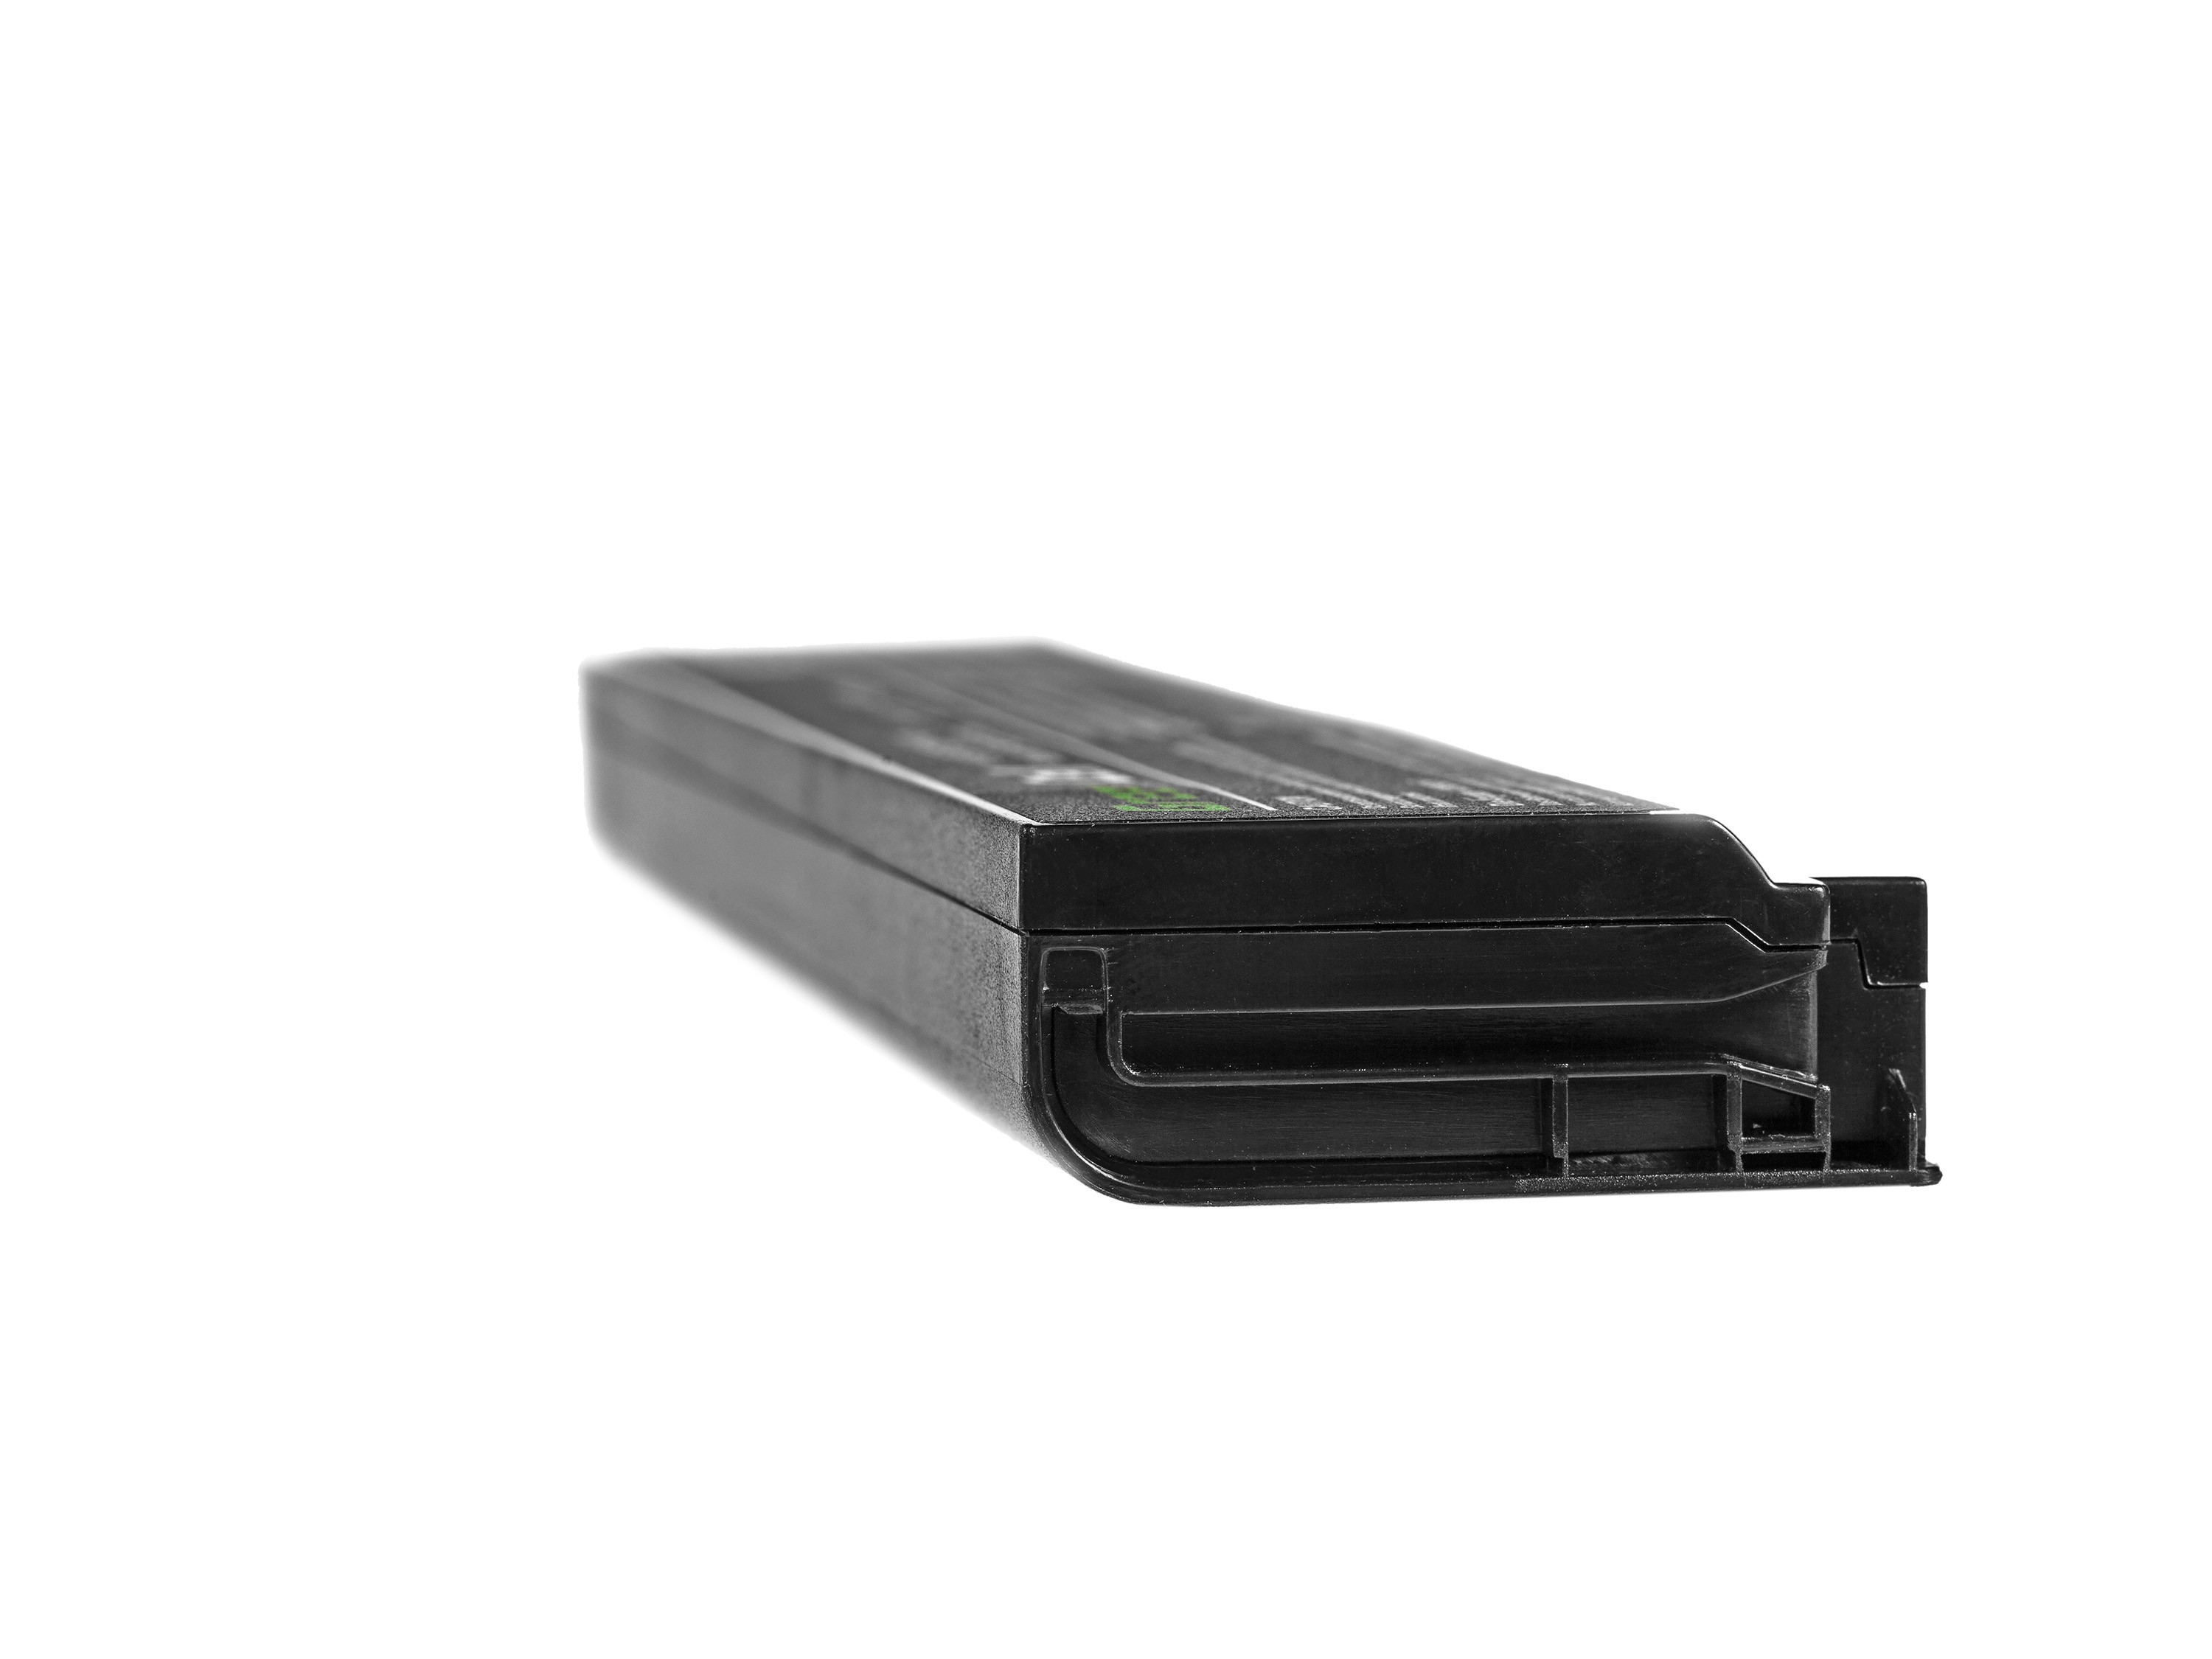 Green Cell TS03V2 Baterie Toshiba Satellite A660 C650 C660 C660D L650 L650D L655 L670 L670D L675 4400mAh Li-ion